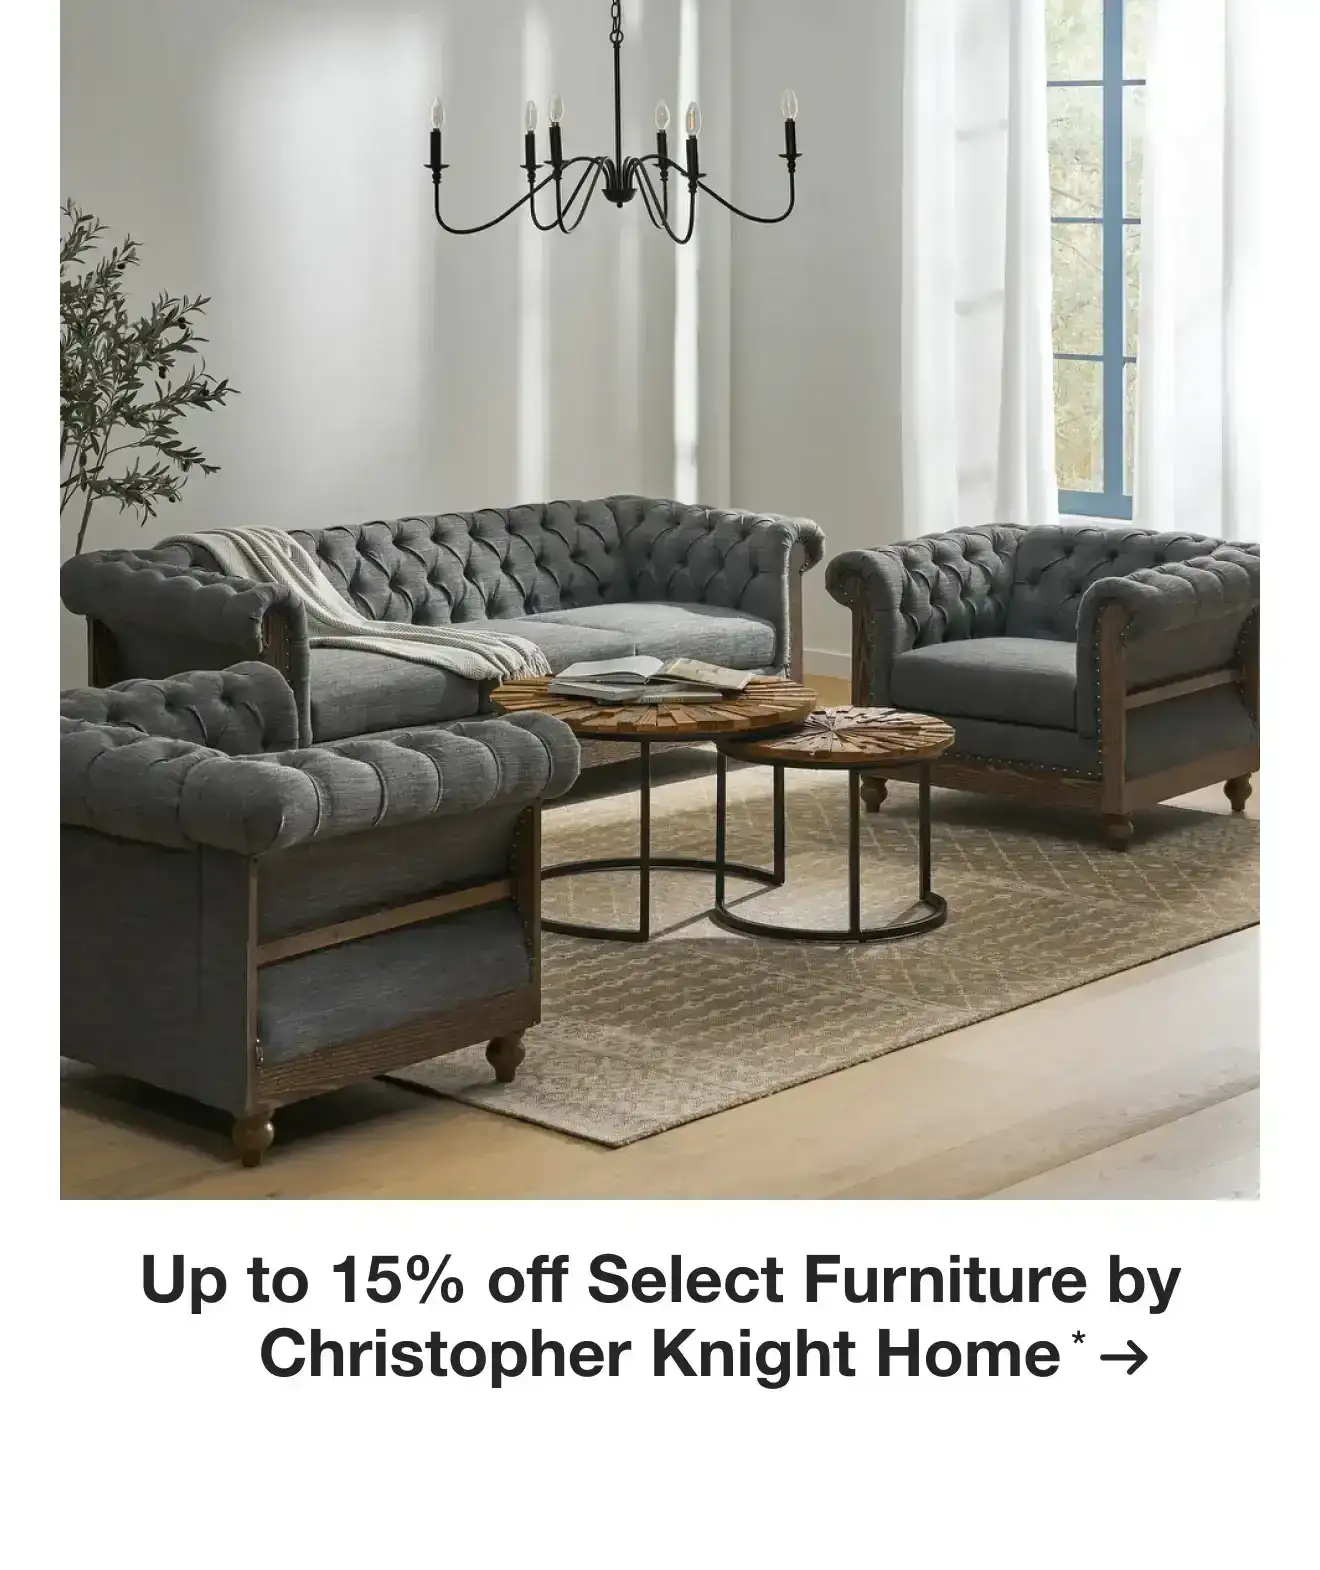 Up to 15% off Select Furniture by Christopher Knight Home*